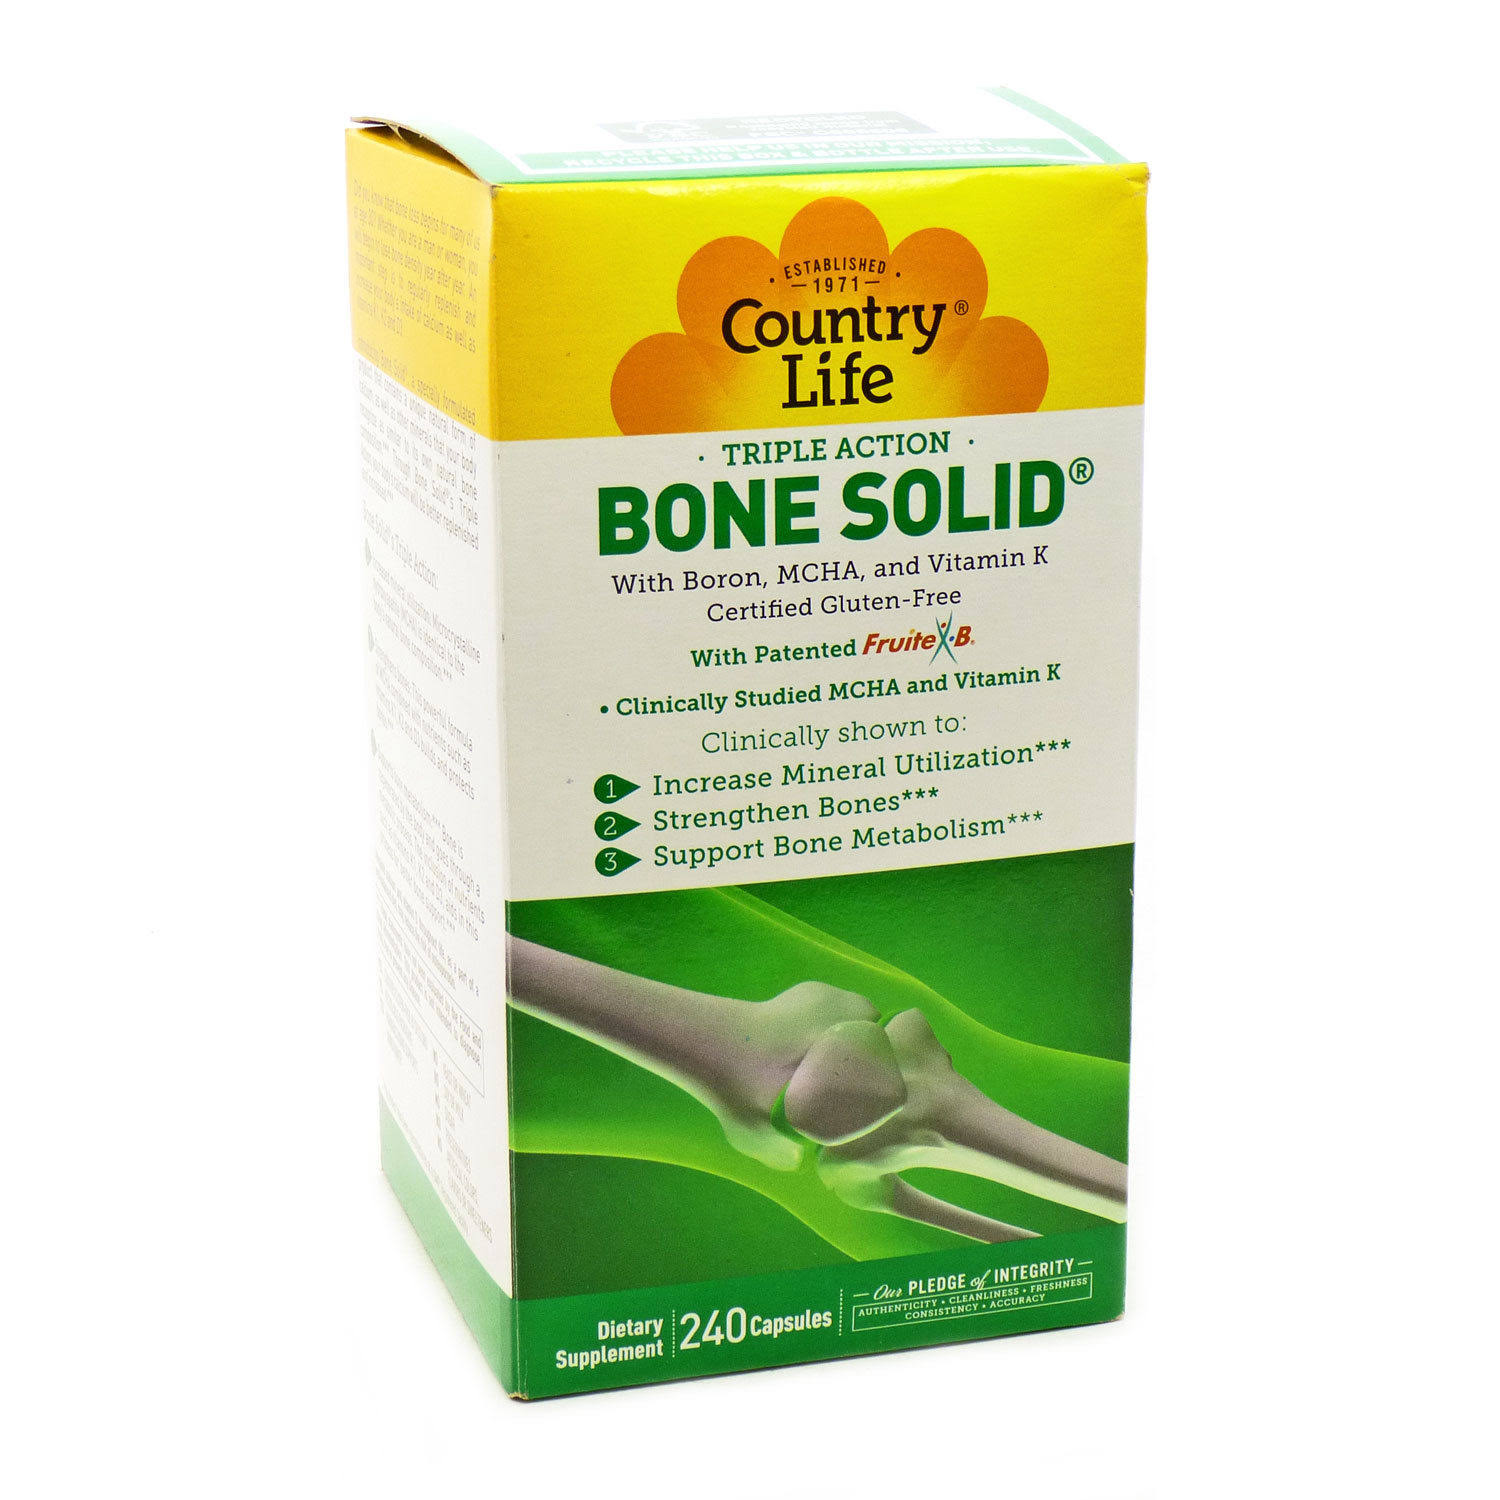 Country Life Bone Solid Calcium Supplements - 240 Count